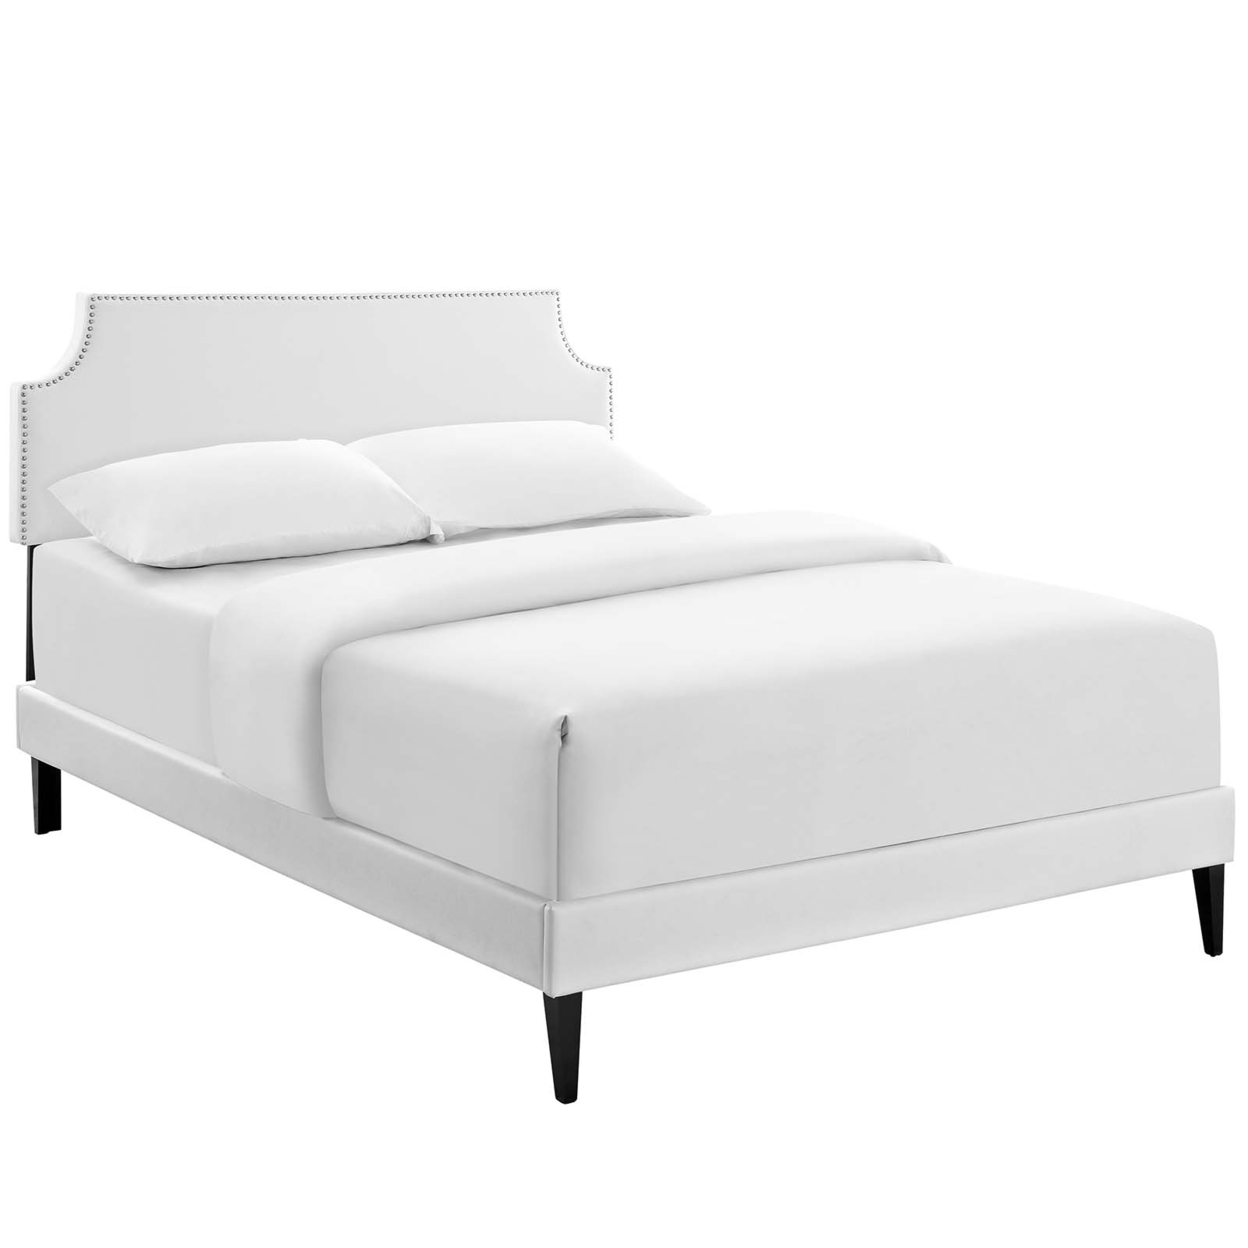 Corene Queen Vinyl Platform Bed With Squared Tapered Legs, White